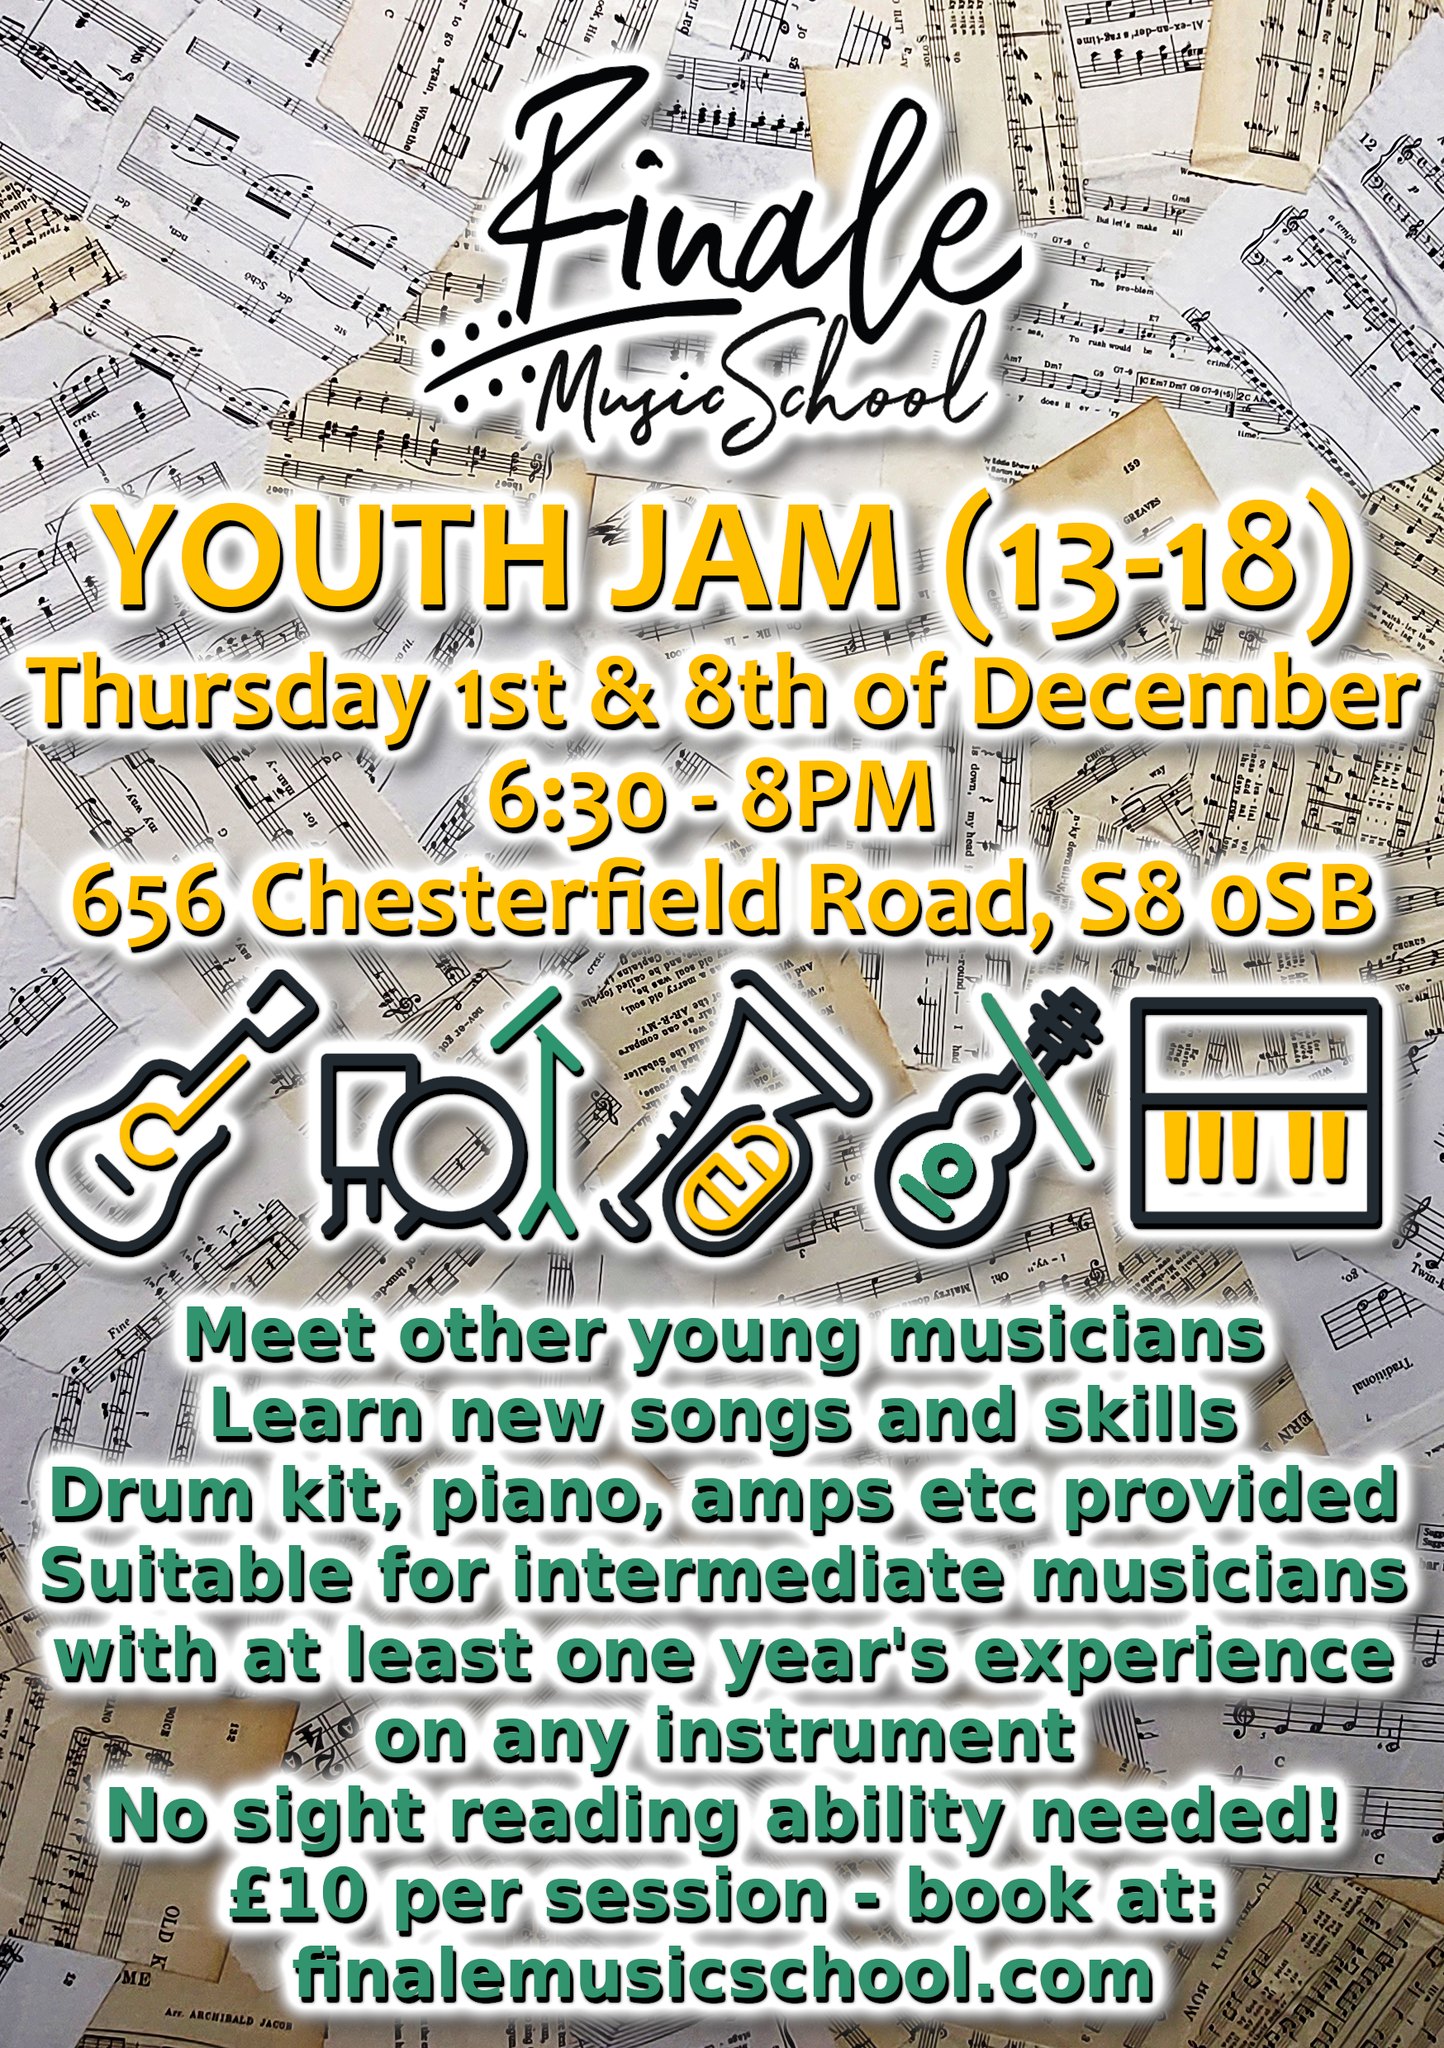 Finale Music School Sheffield Youth Jam poster- a fun event for young musicians aged 13-18!